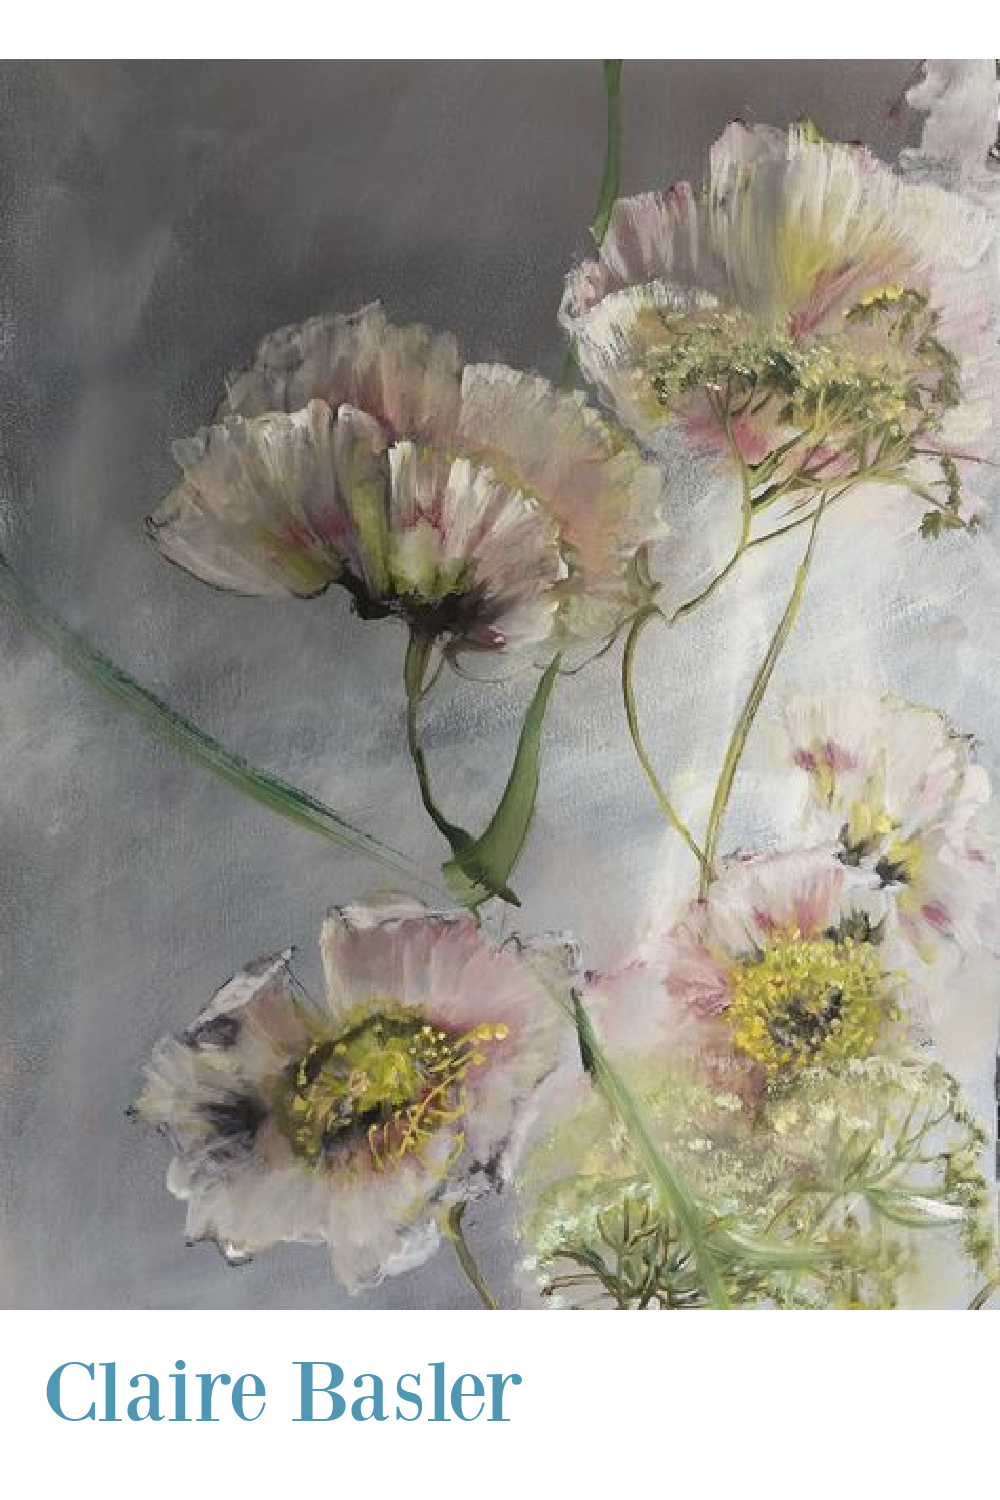 Floral painting by Claire Basler.